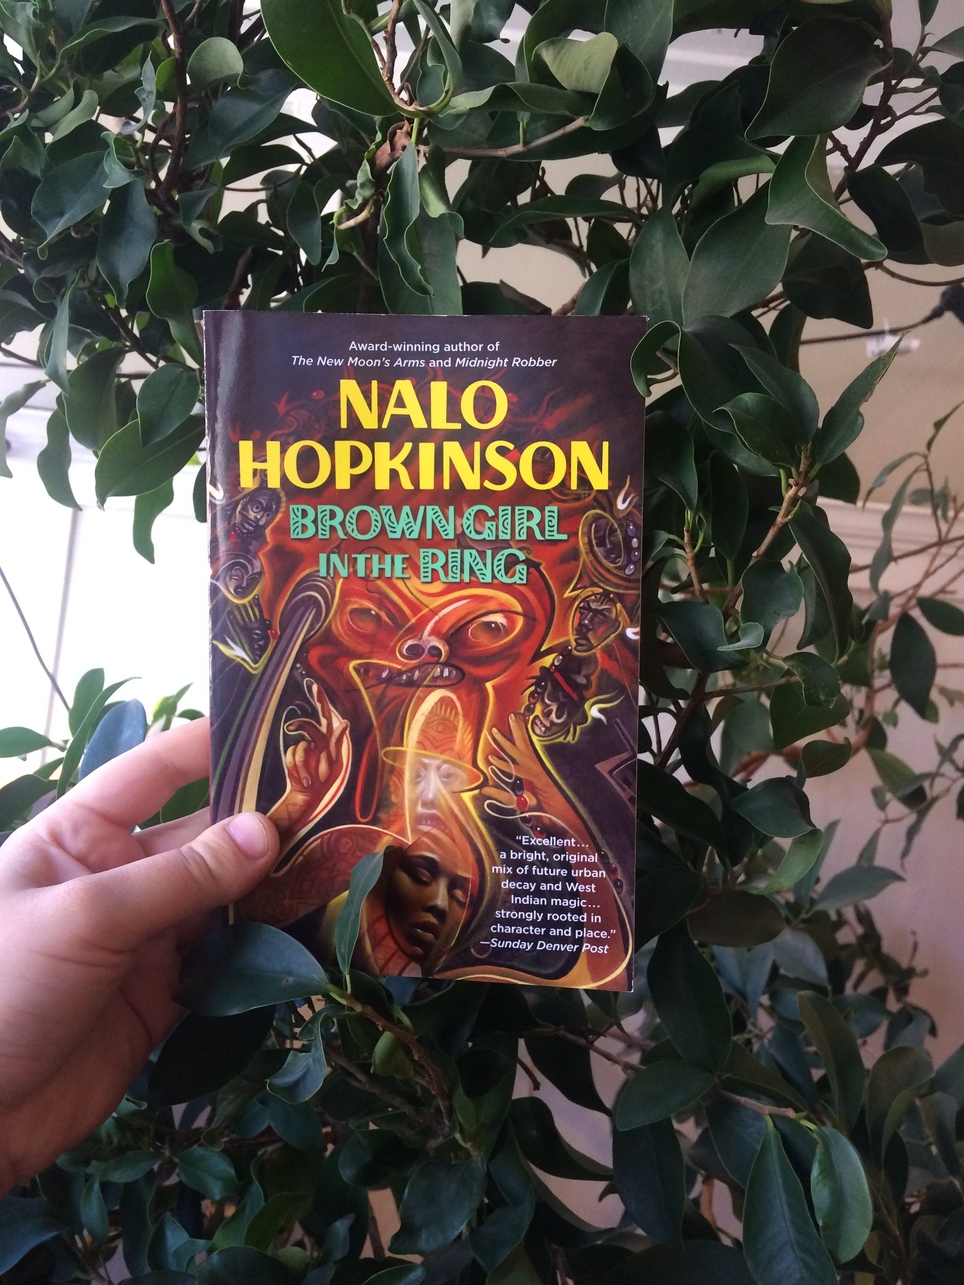 "Sci-fi and Fantasy are the only genres that realistically depict the lives of marginalized people - Nalo Hopkinson": Strange Futures reads Brown Girl in the Ring